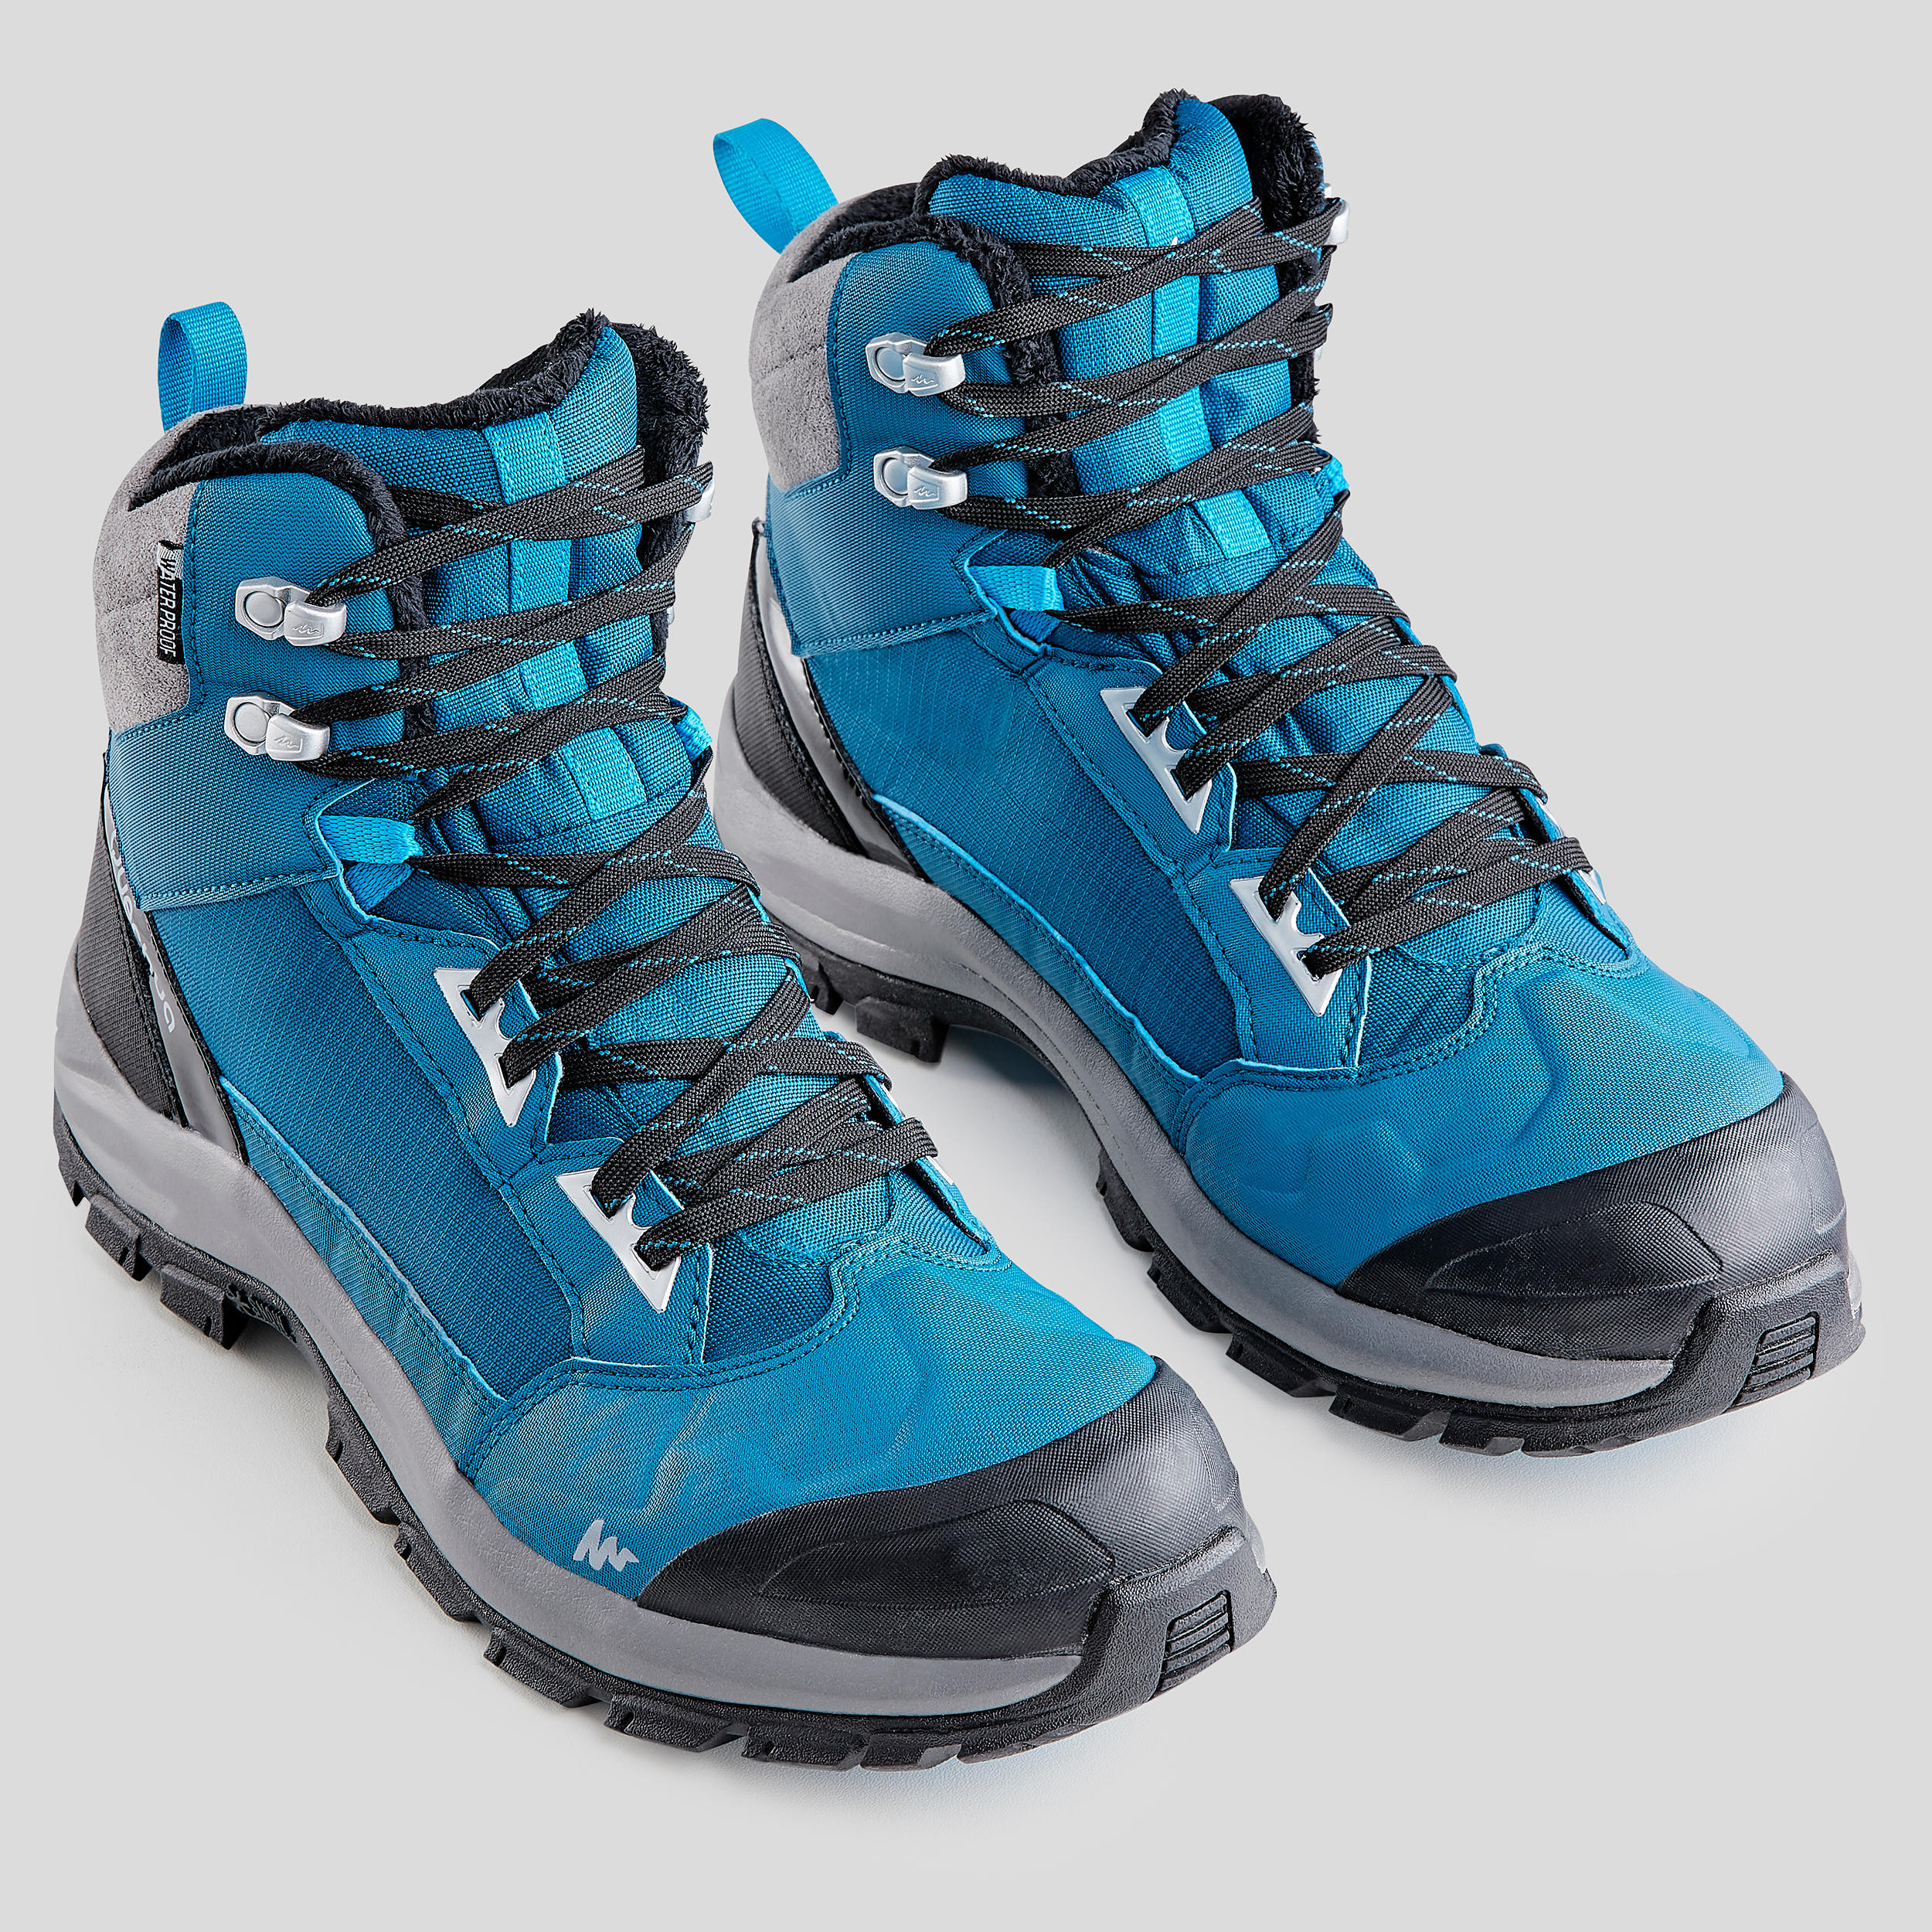 Men’s Warm and Waterproof Hiking Boots - SH500 mountain MID 2/8